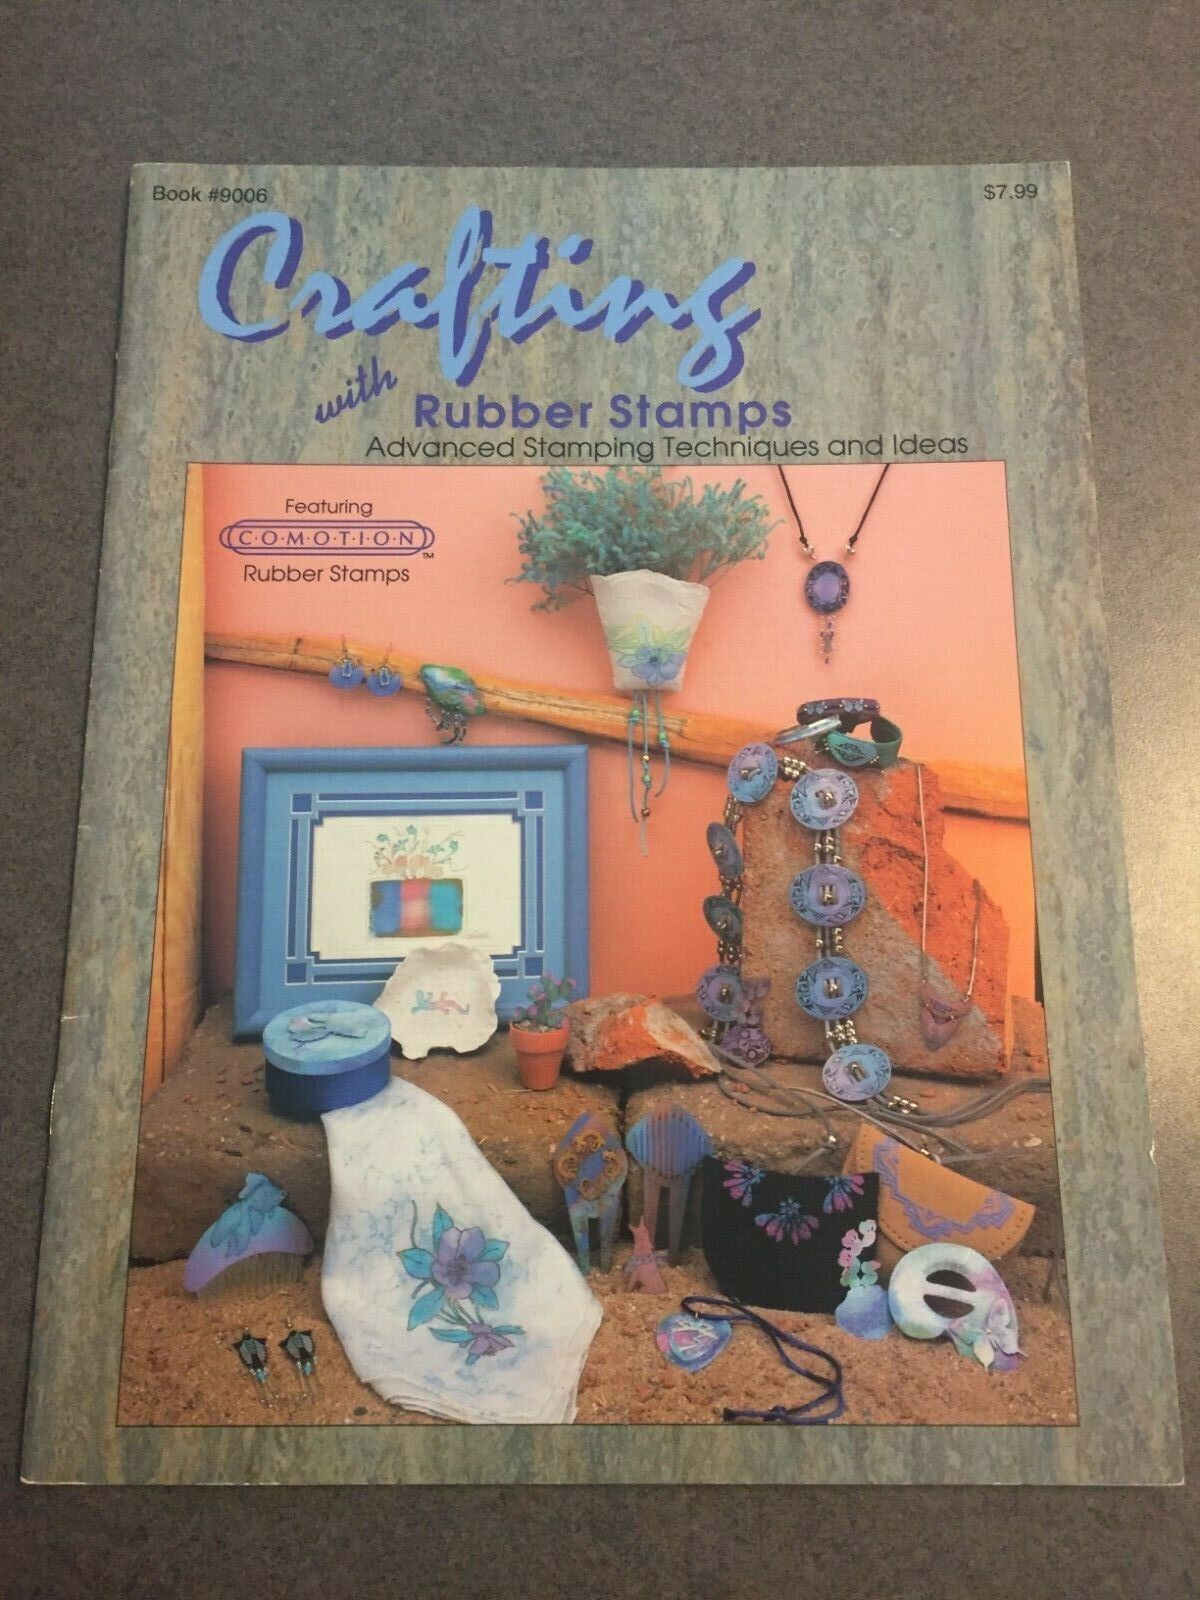 Crafting With Rubber Stamps Advanced Techniques Book 9006 1993 Paperback